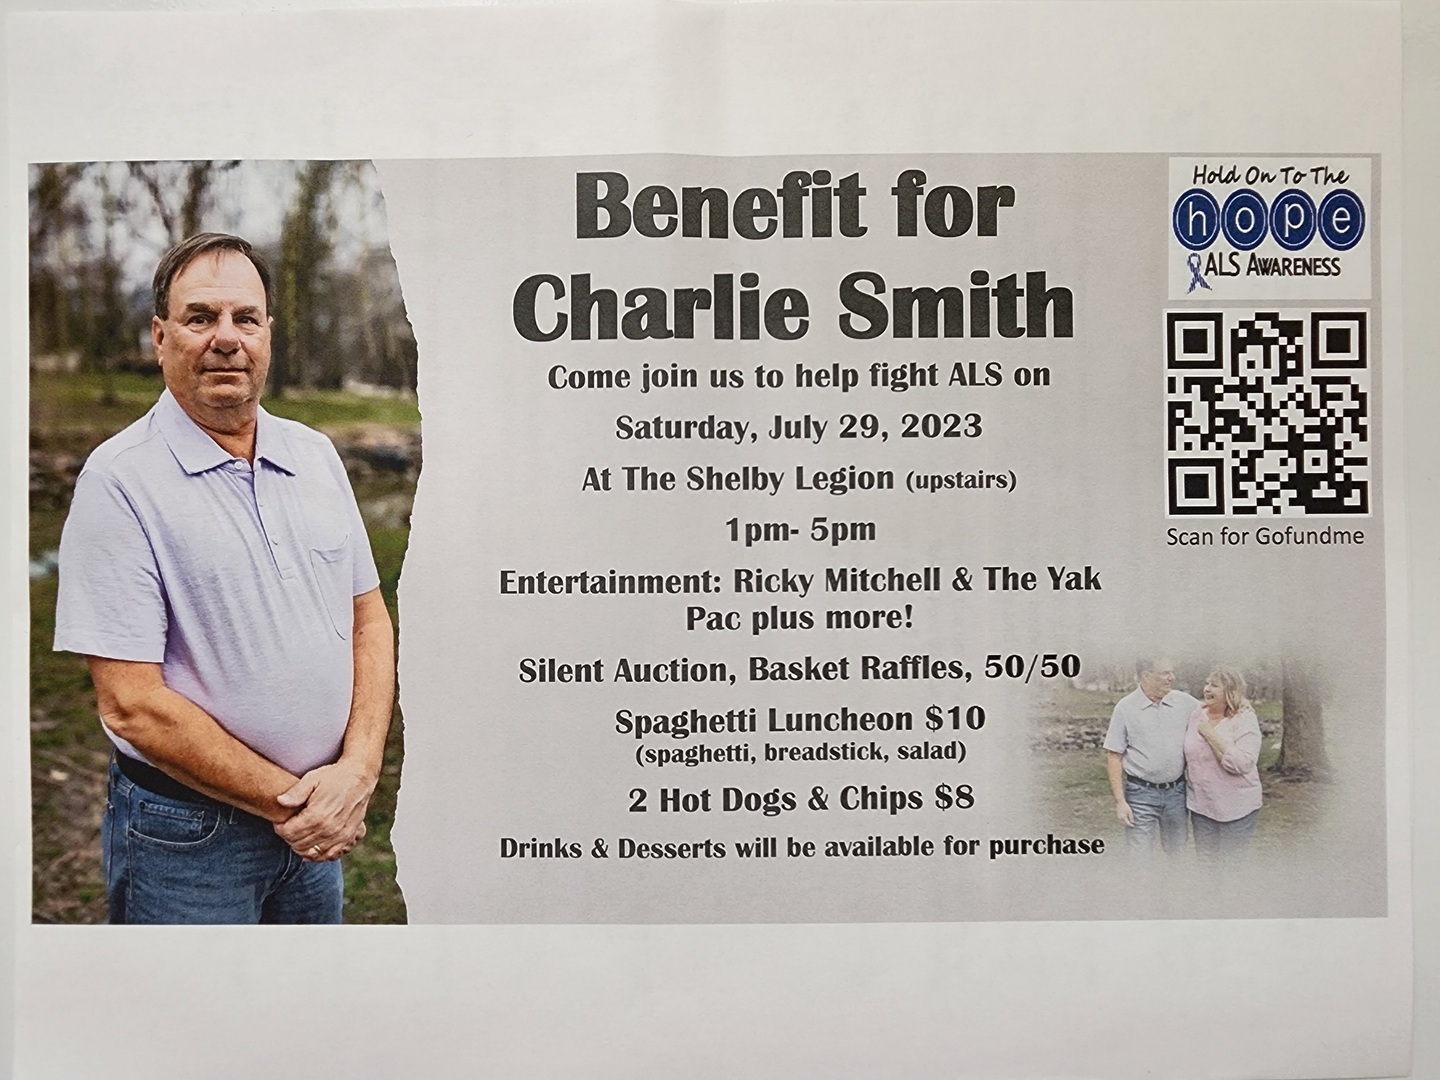 Benefit for Charlie Smith *Join us to help fight ALS on Saturday, July 29, 2023, Shelby, Ohio, United States